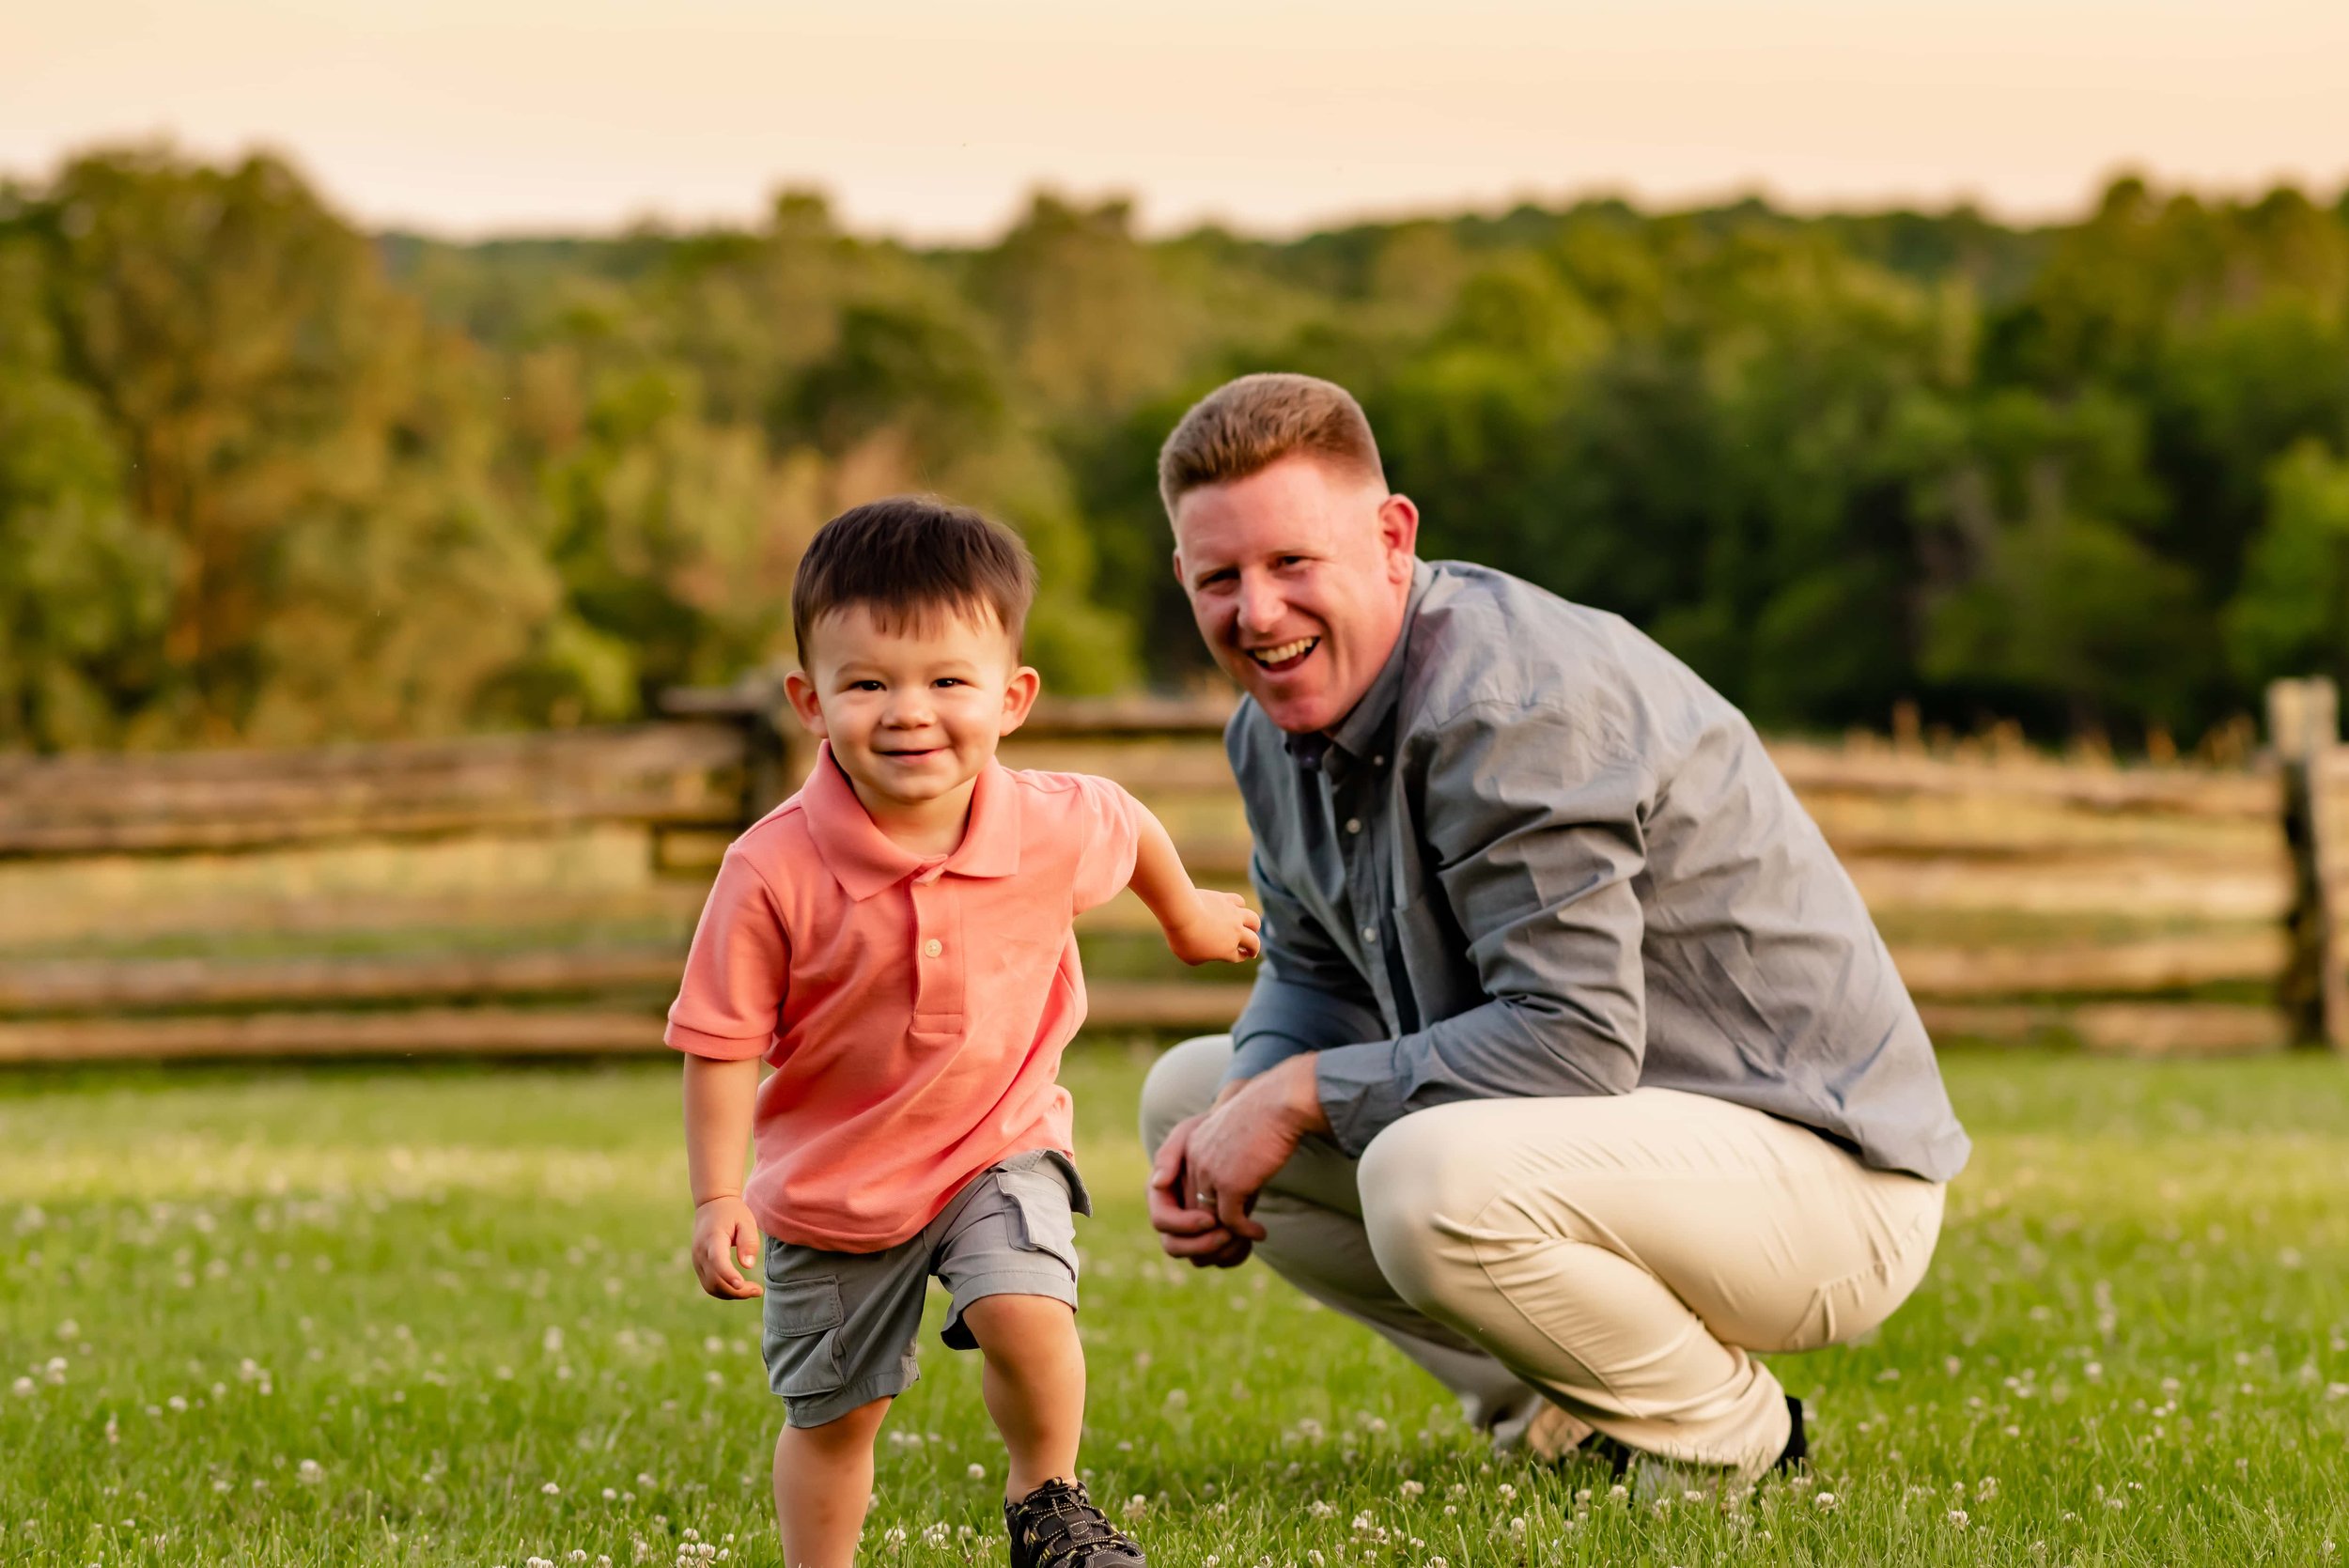 Maryland family portrait of smiling father and son